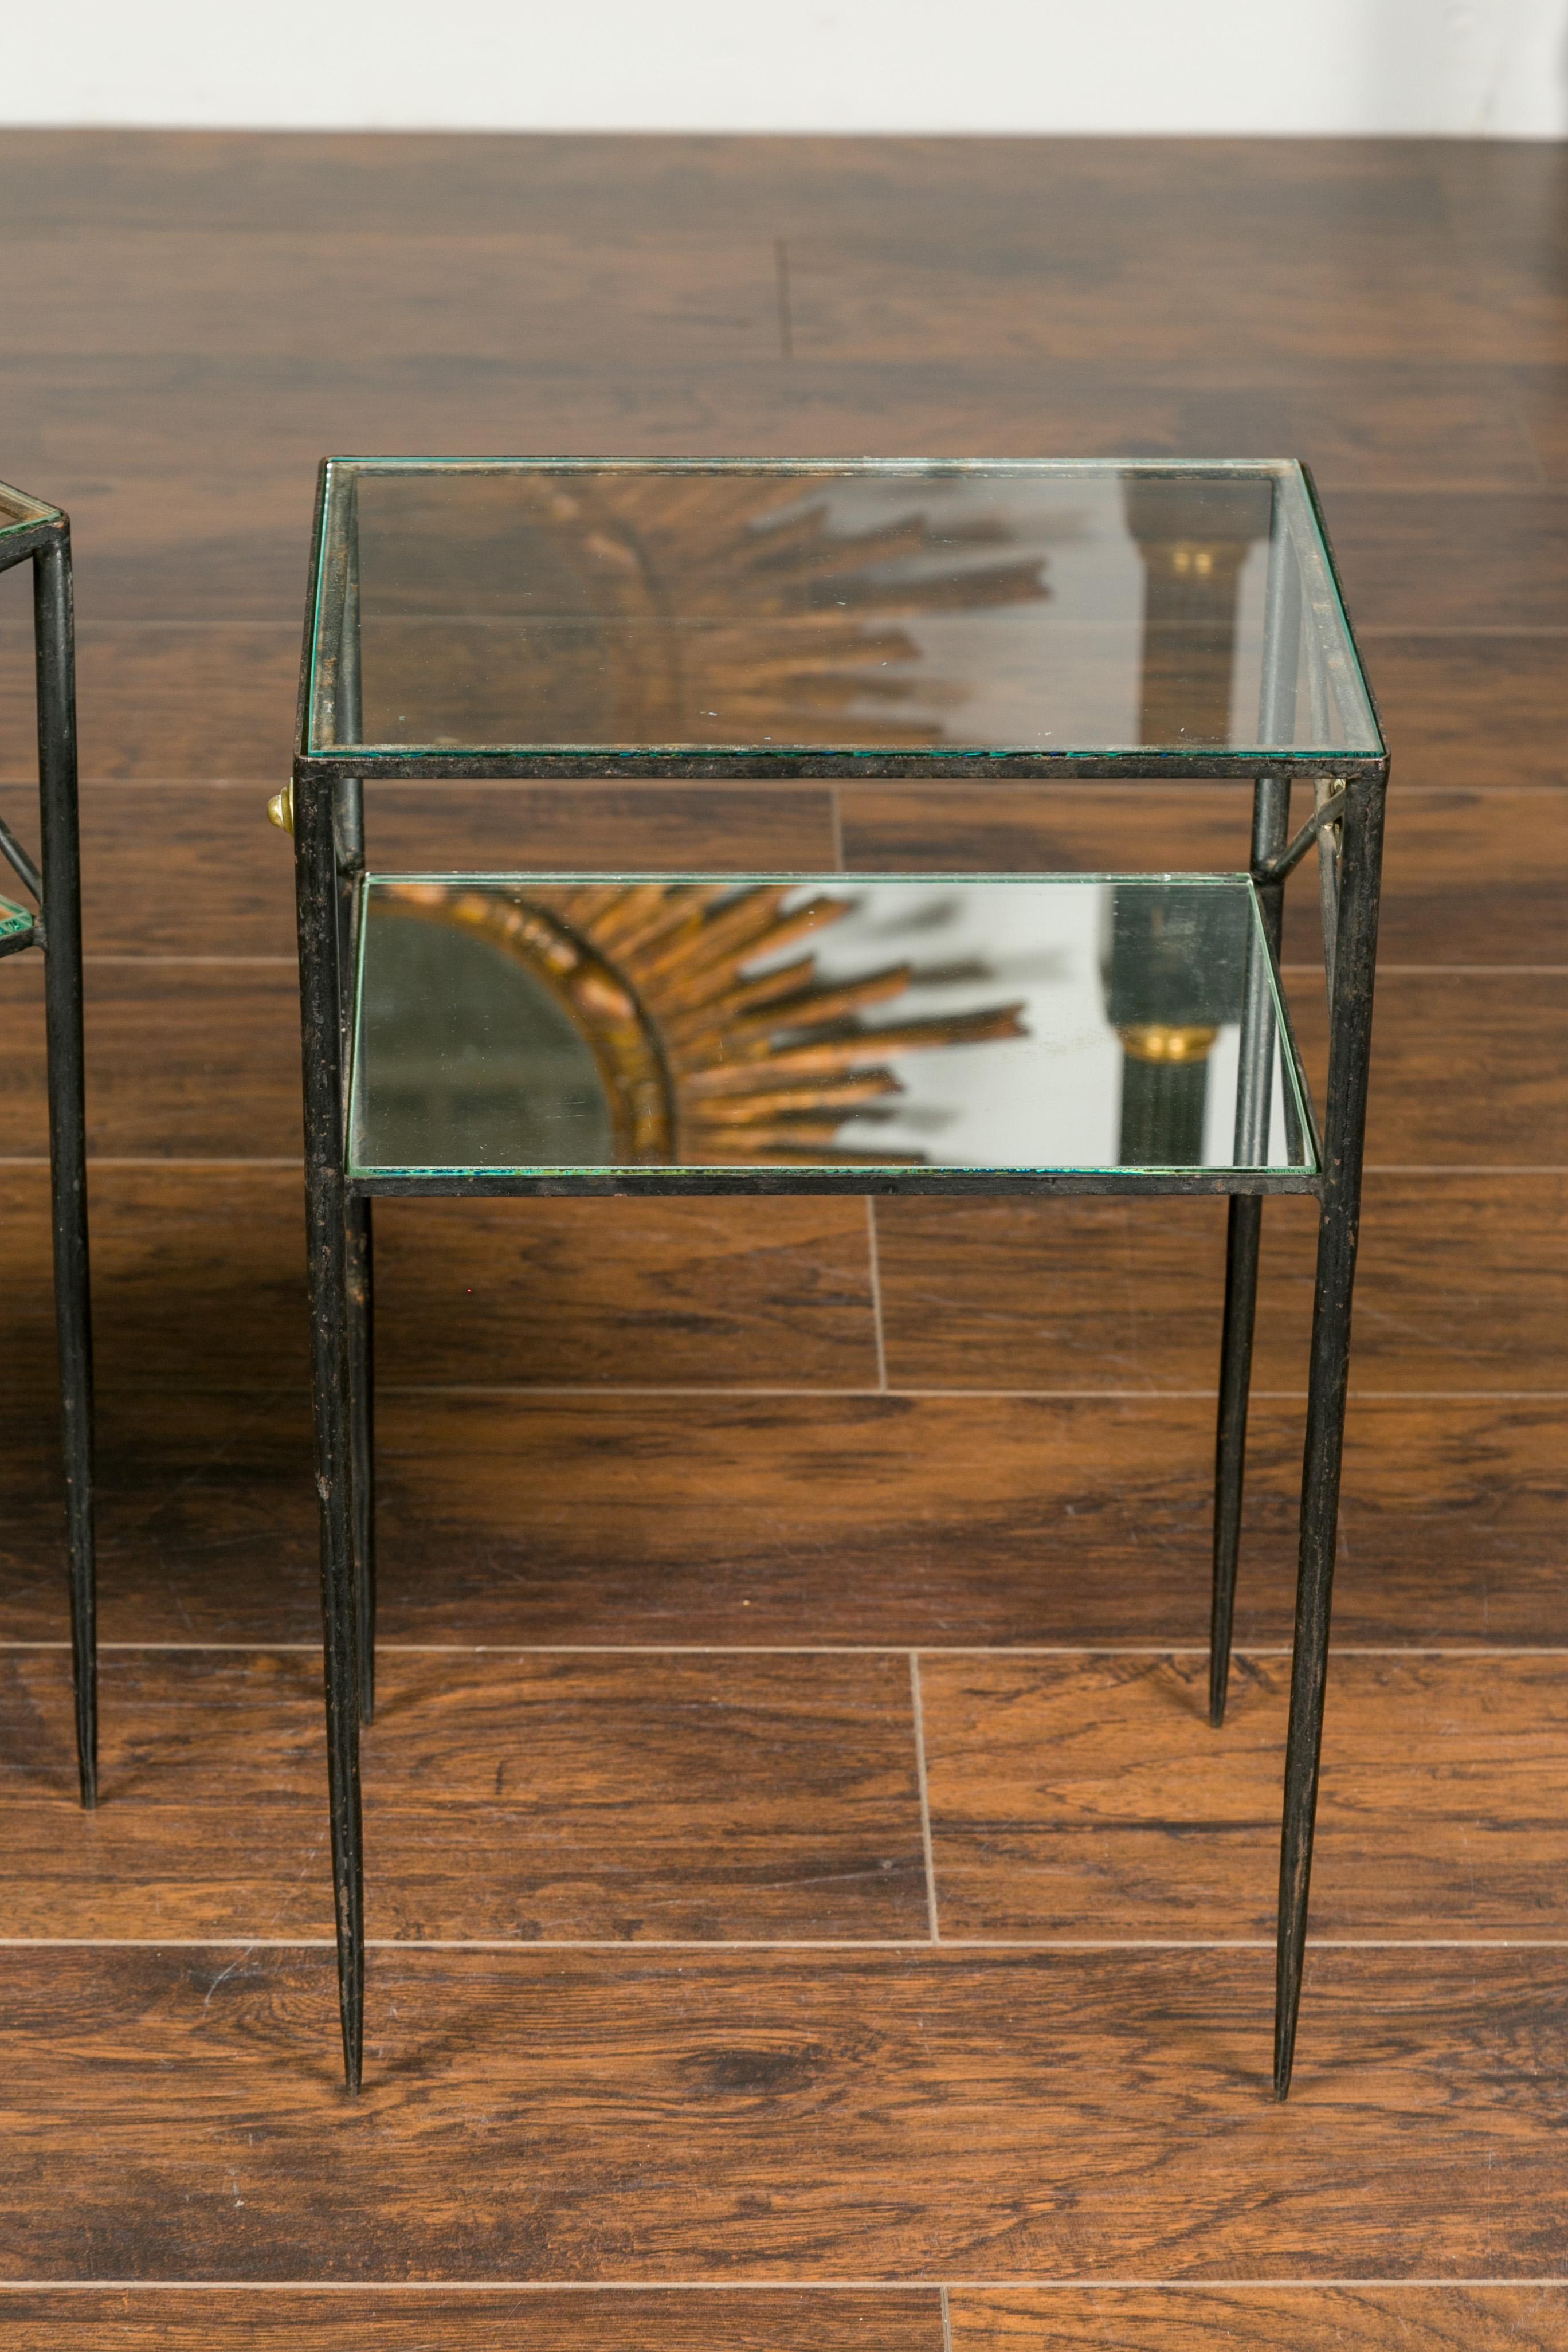 20th Century Pair of French Midcentury Iron and Brass Tables with Glass Top, Mirrored Shelf